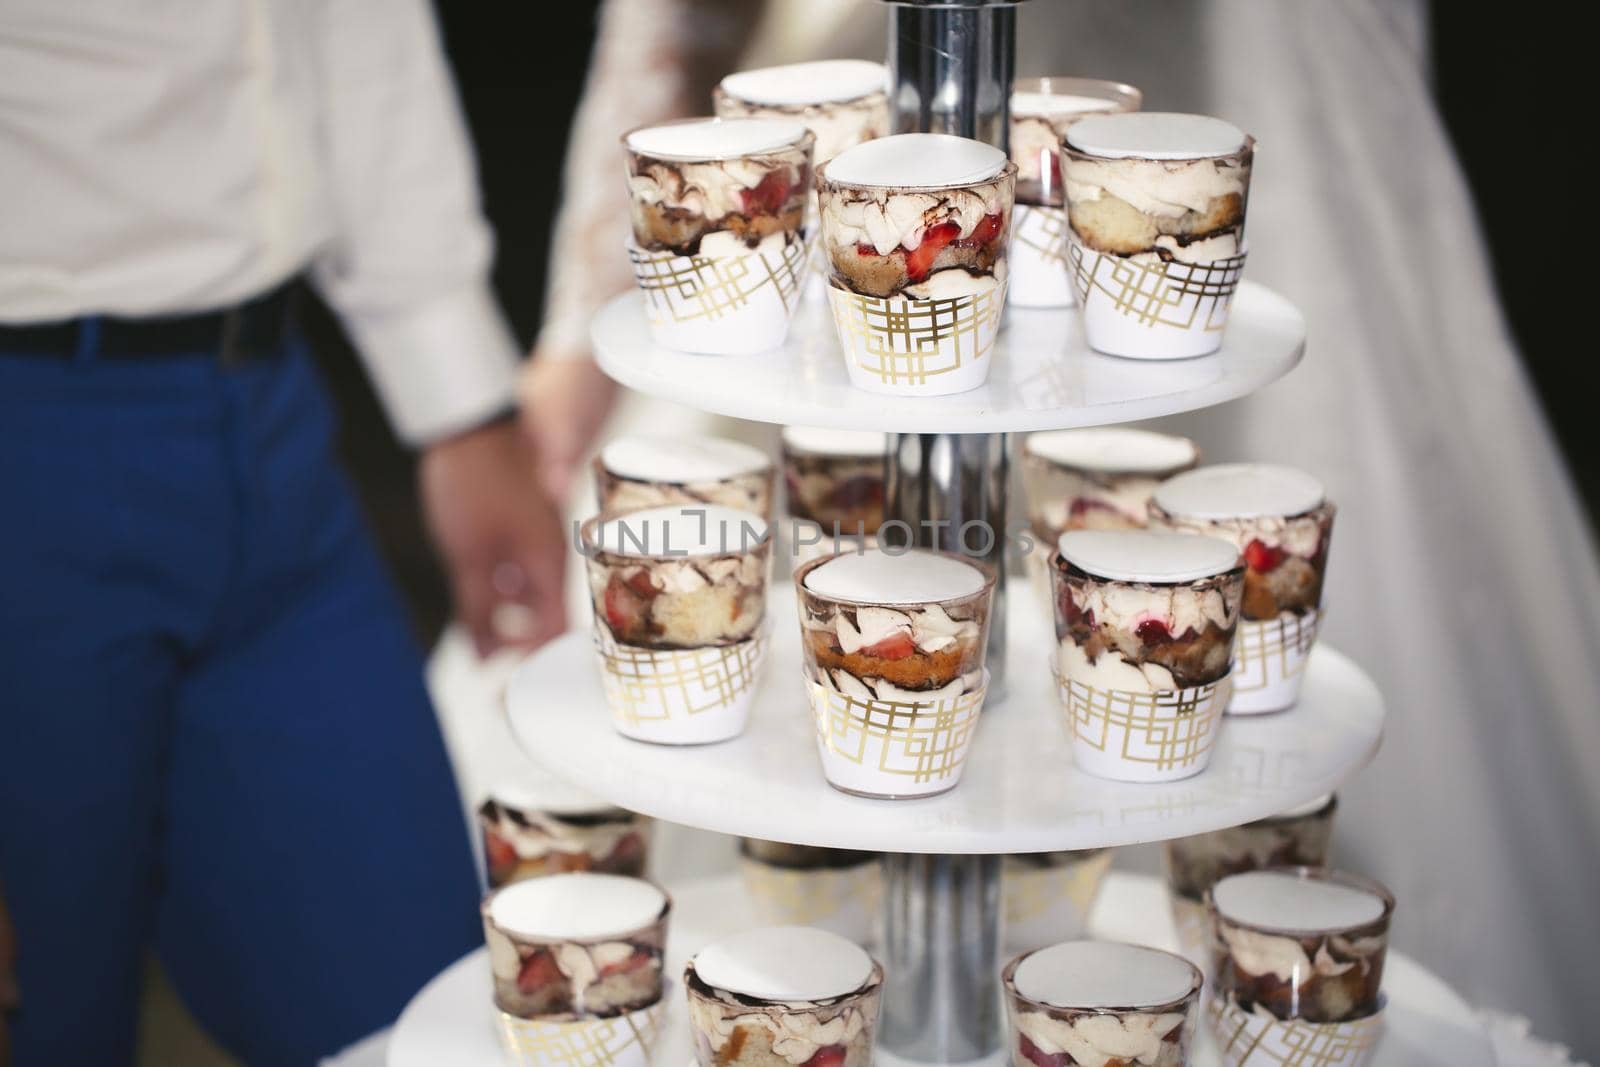 A wedding cake made of trifles on a multi-tiered stand.